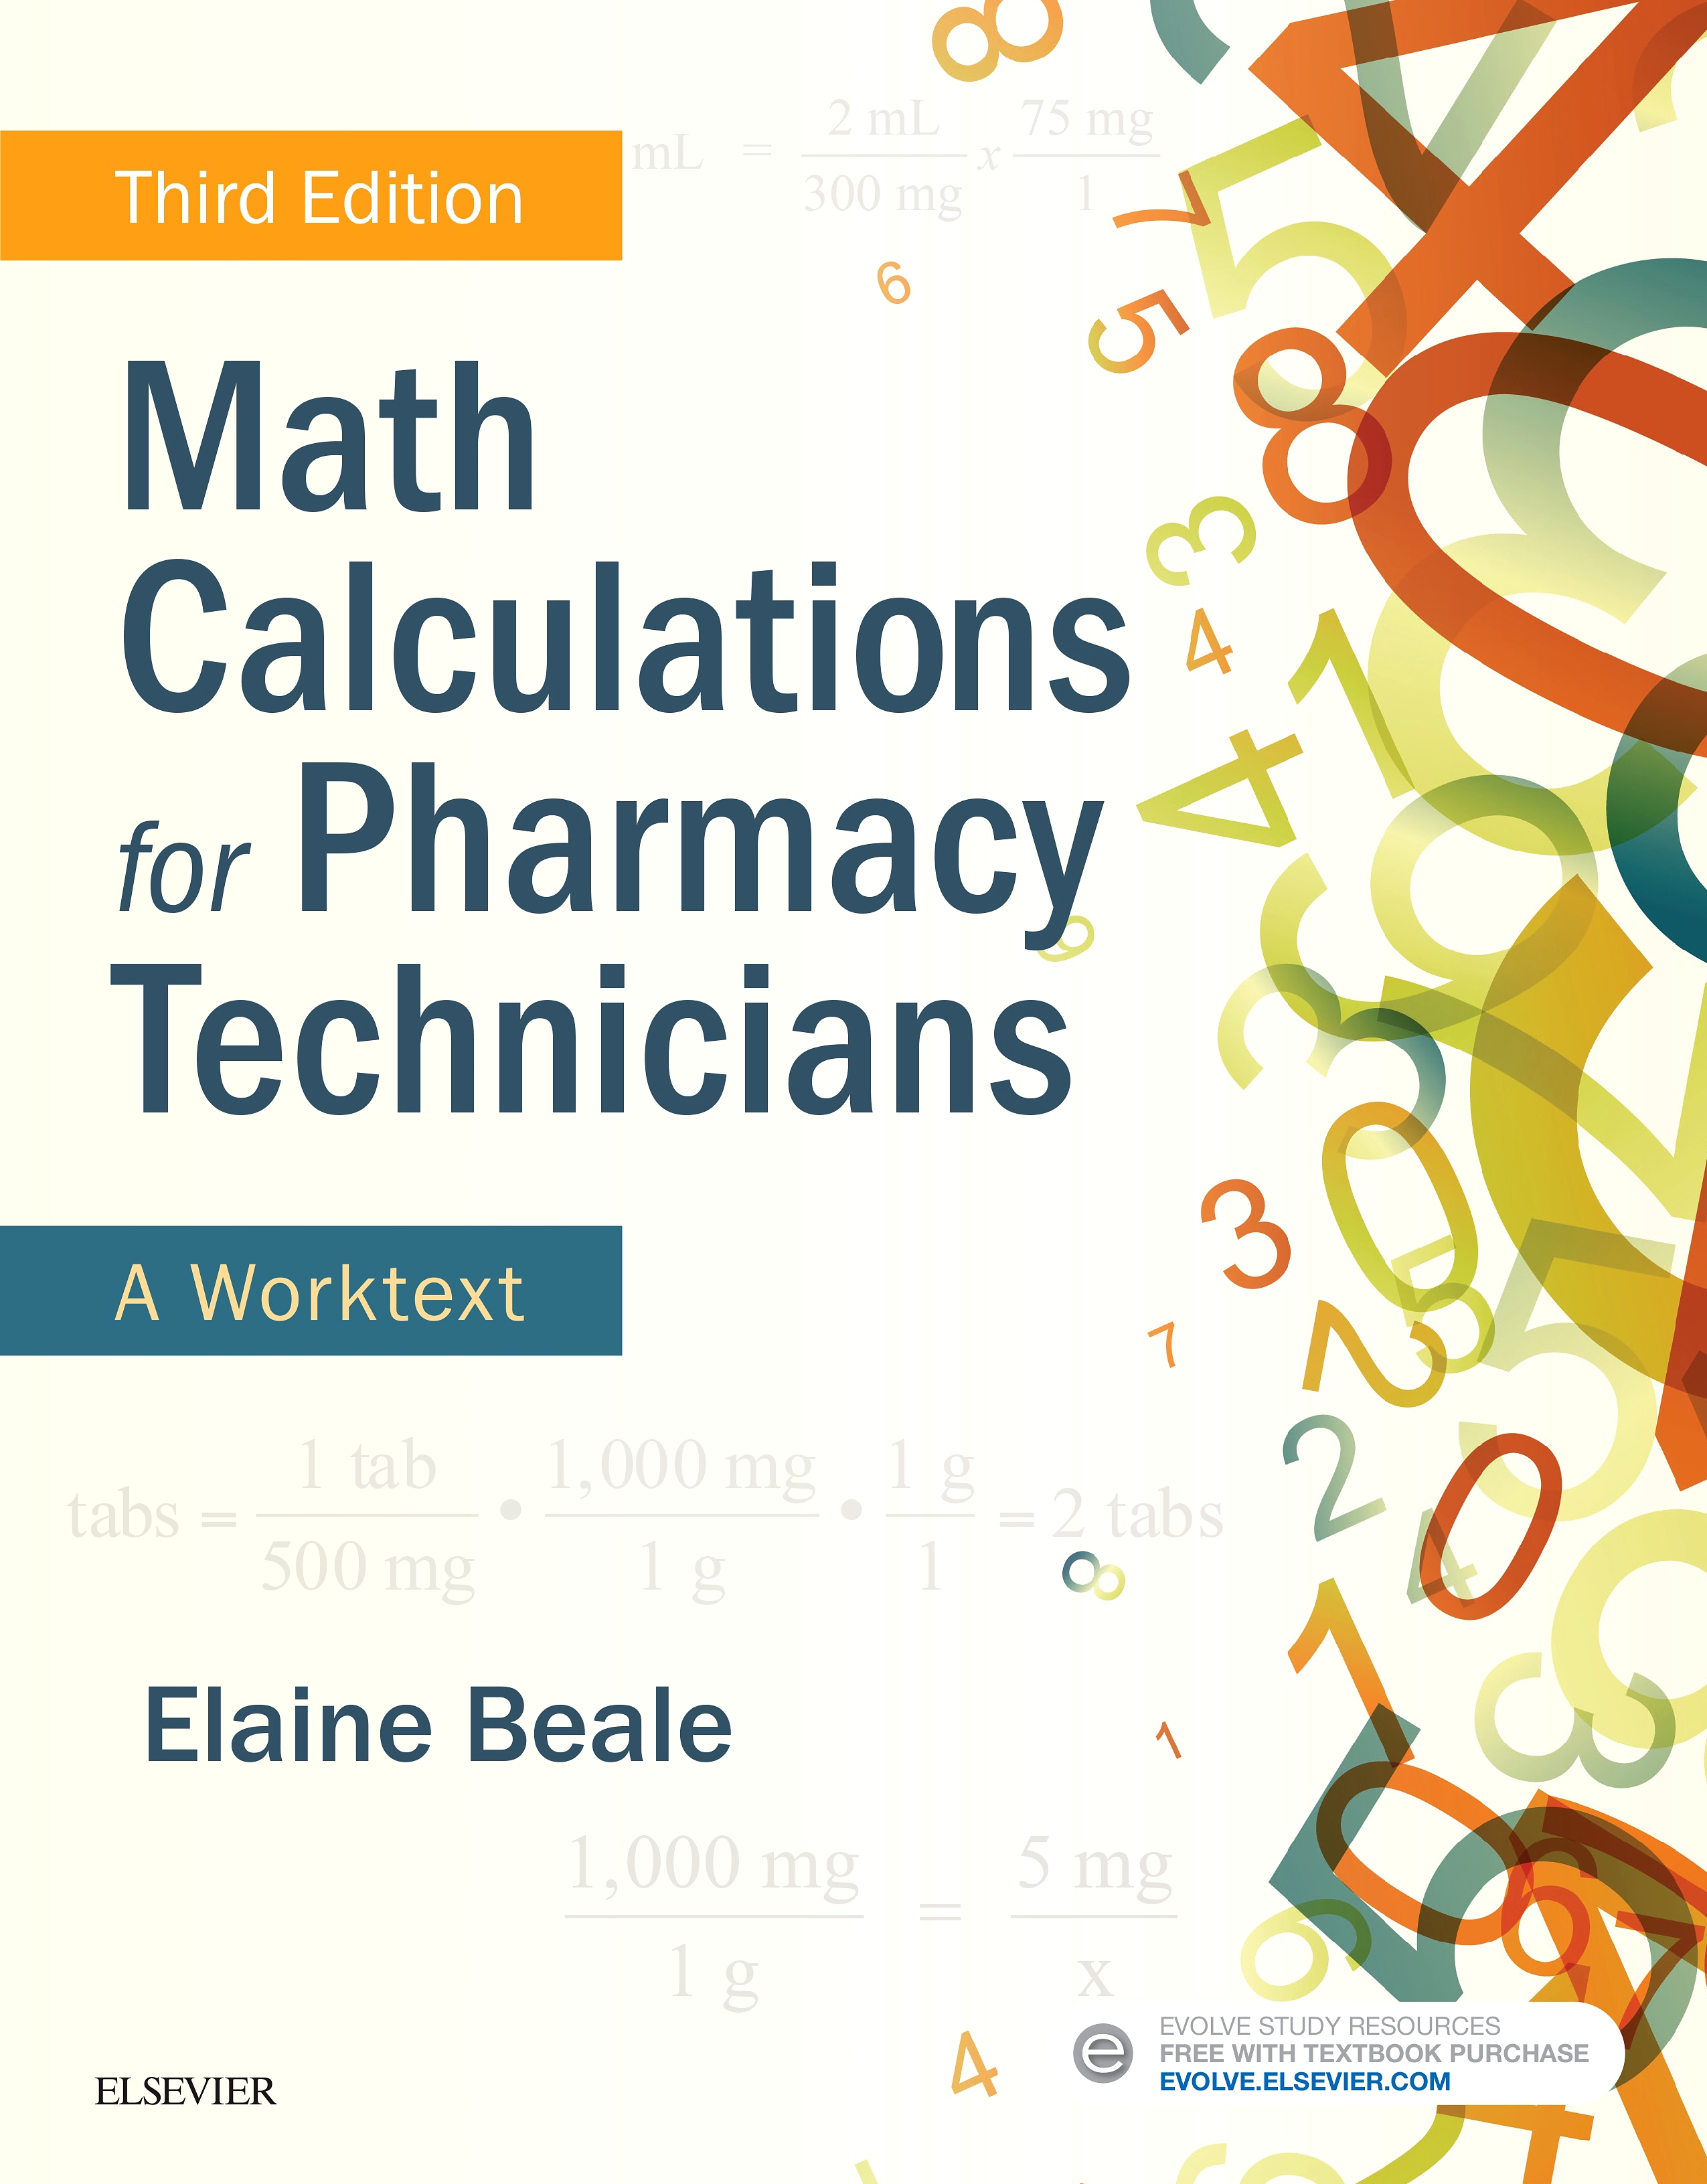 Evolve Resources for Math Calculations for Pharmacy Technicians, 3rd Edition